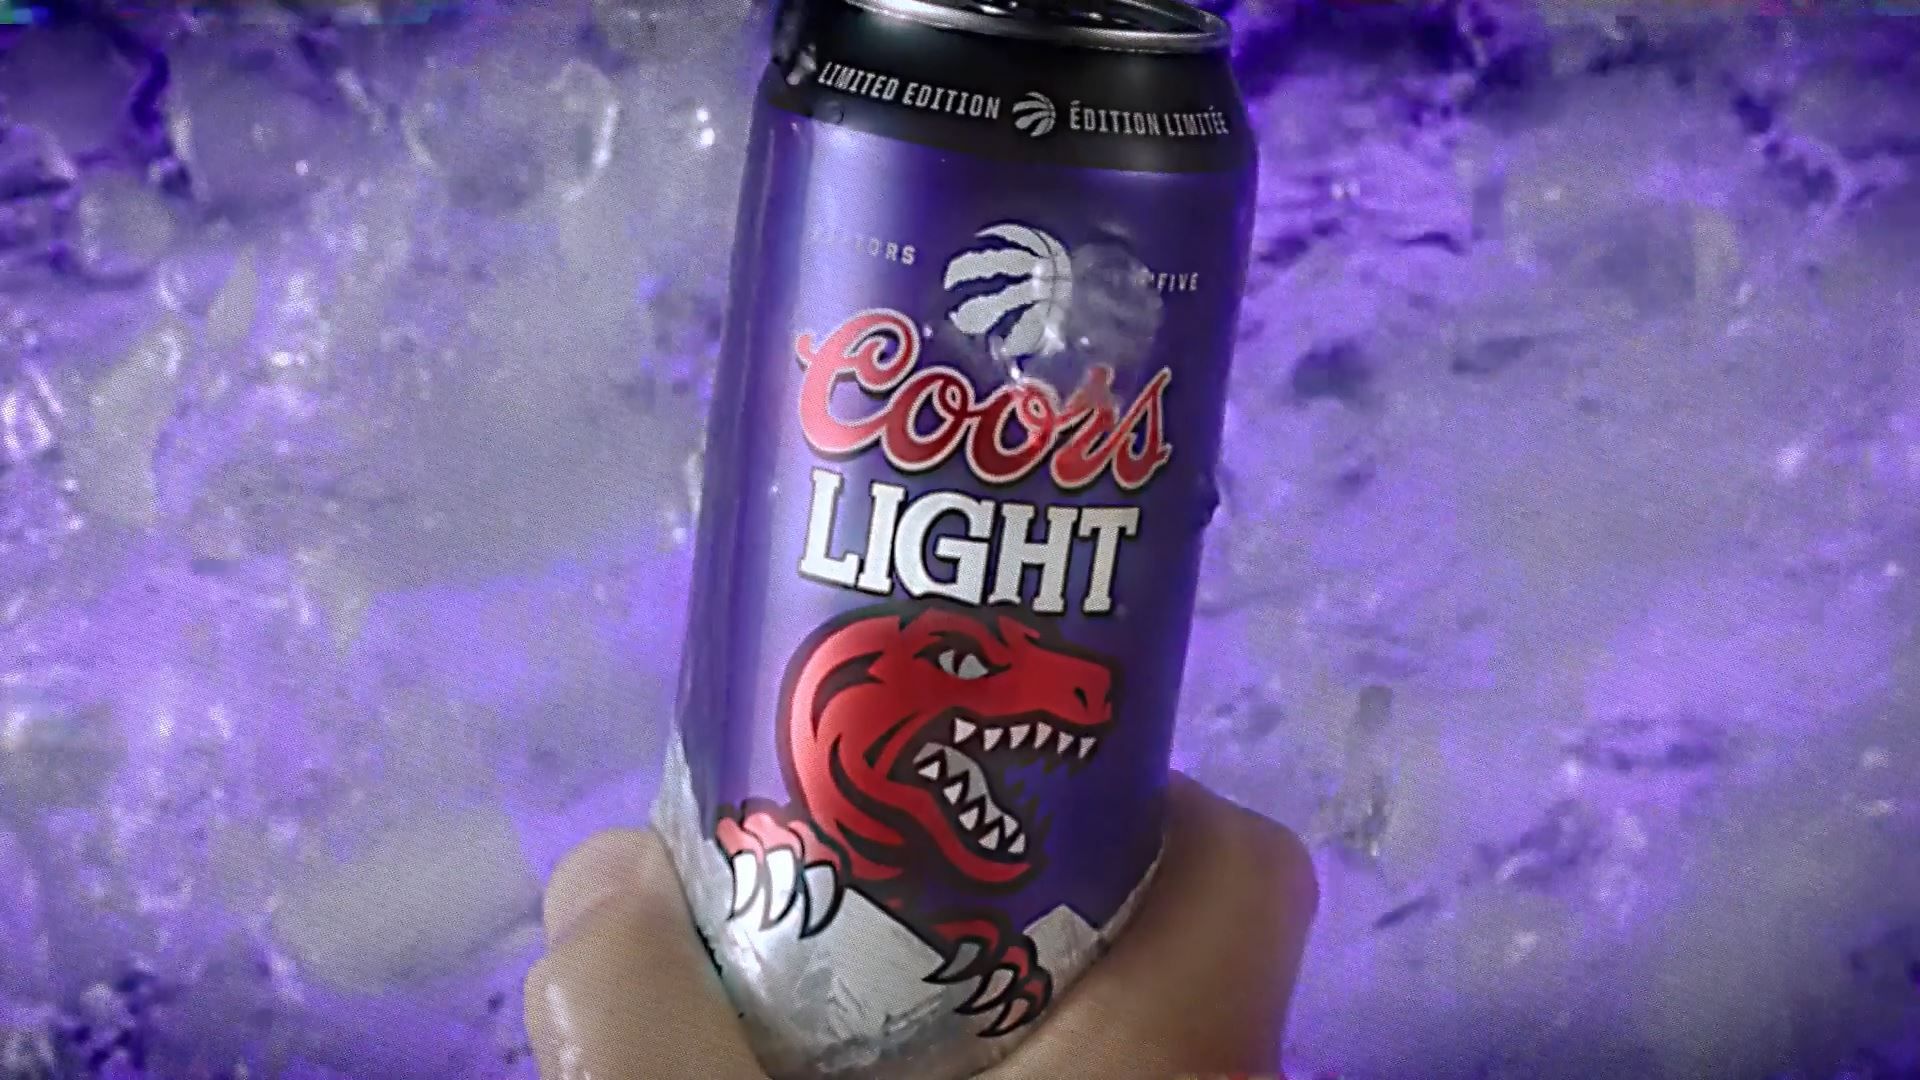 Coors Light Goes Old School With Raptors Anniversary Campaign Strategy